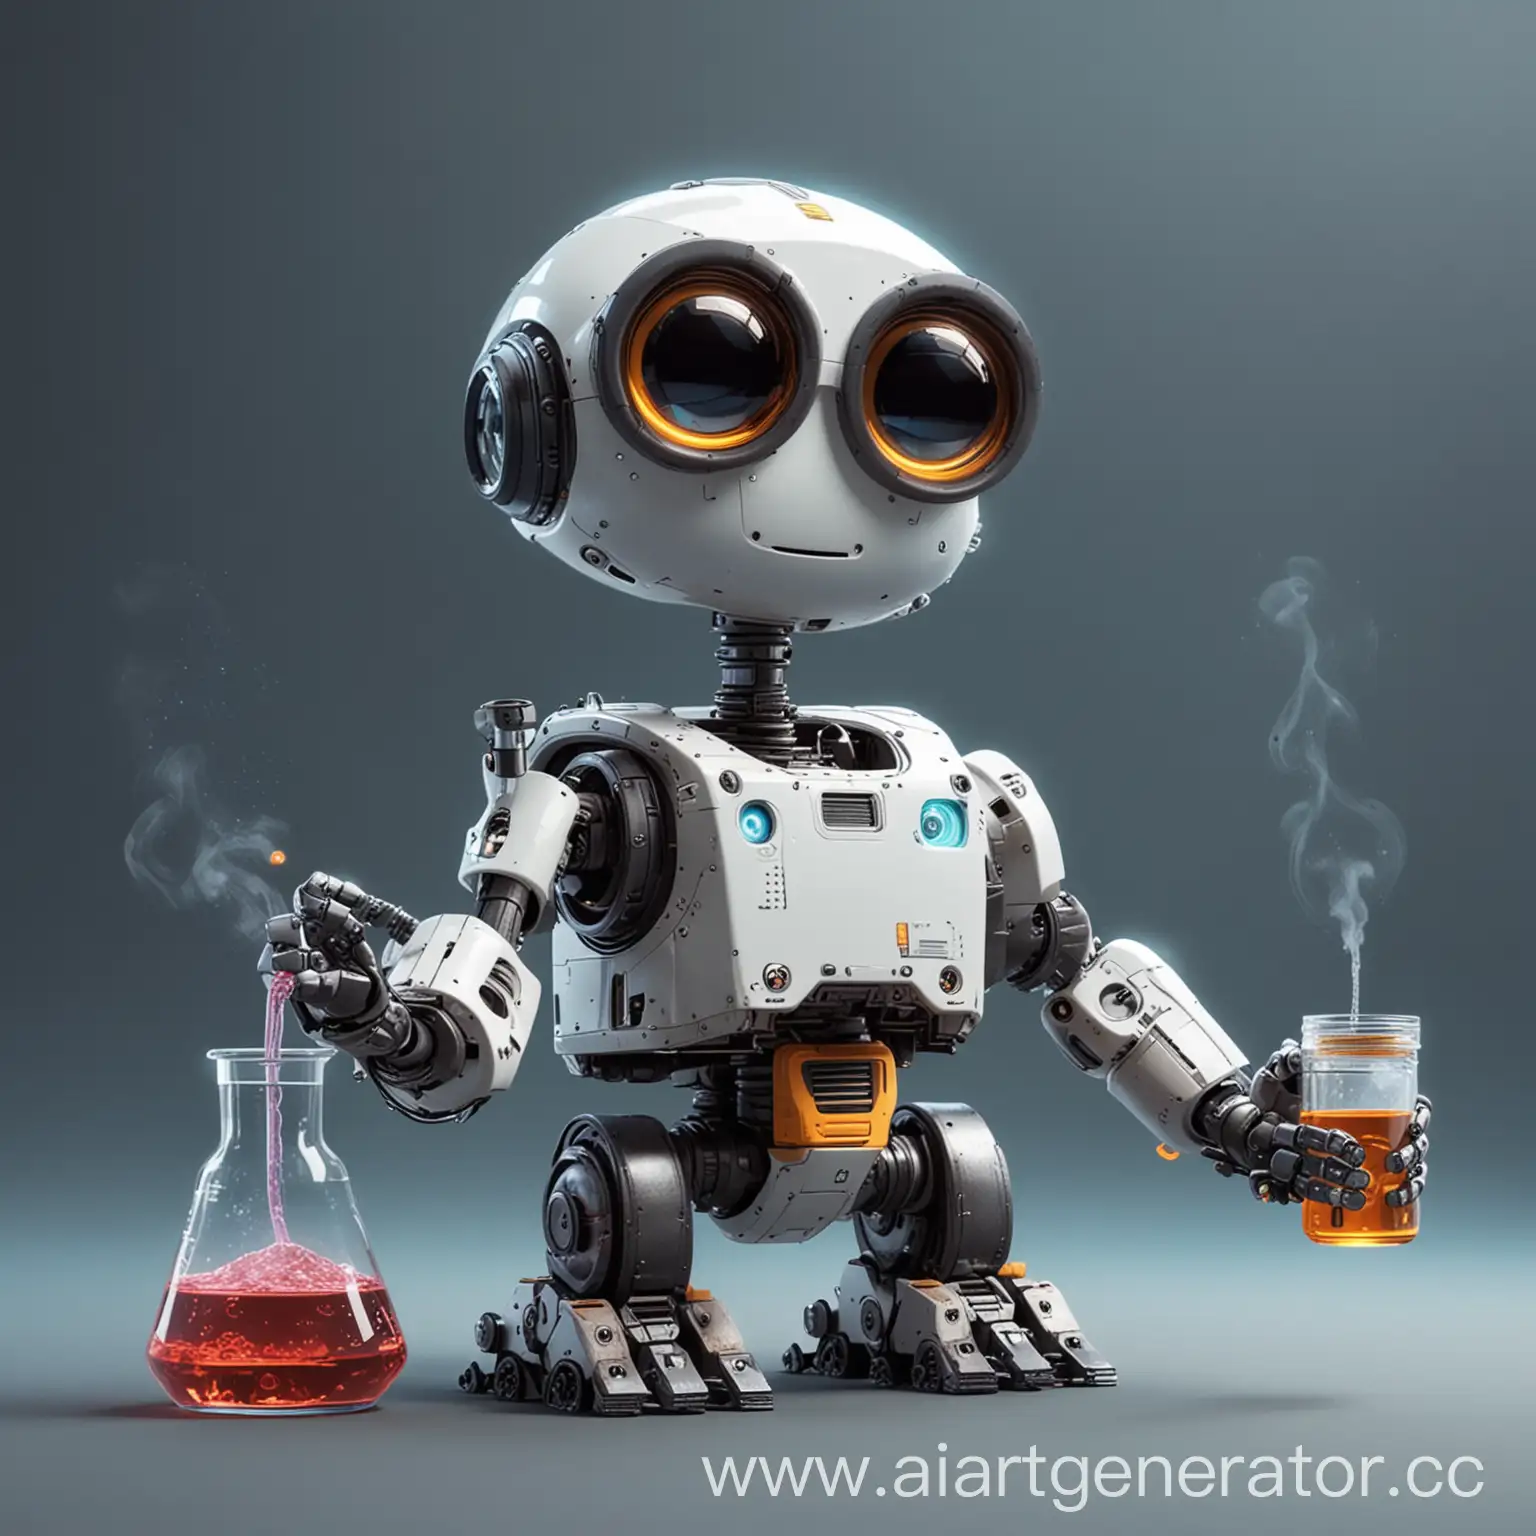 Adorable-Robot-Conducts-Chemical-Experiment-in-Cyberpunk-Cartoon-Style